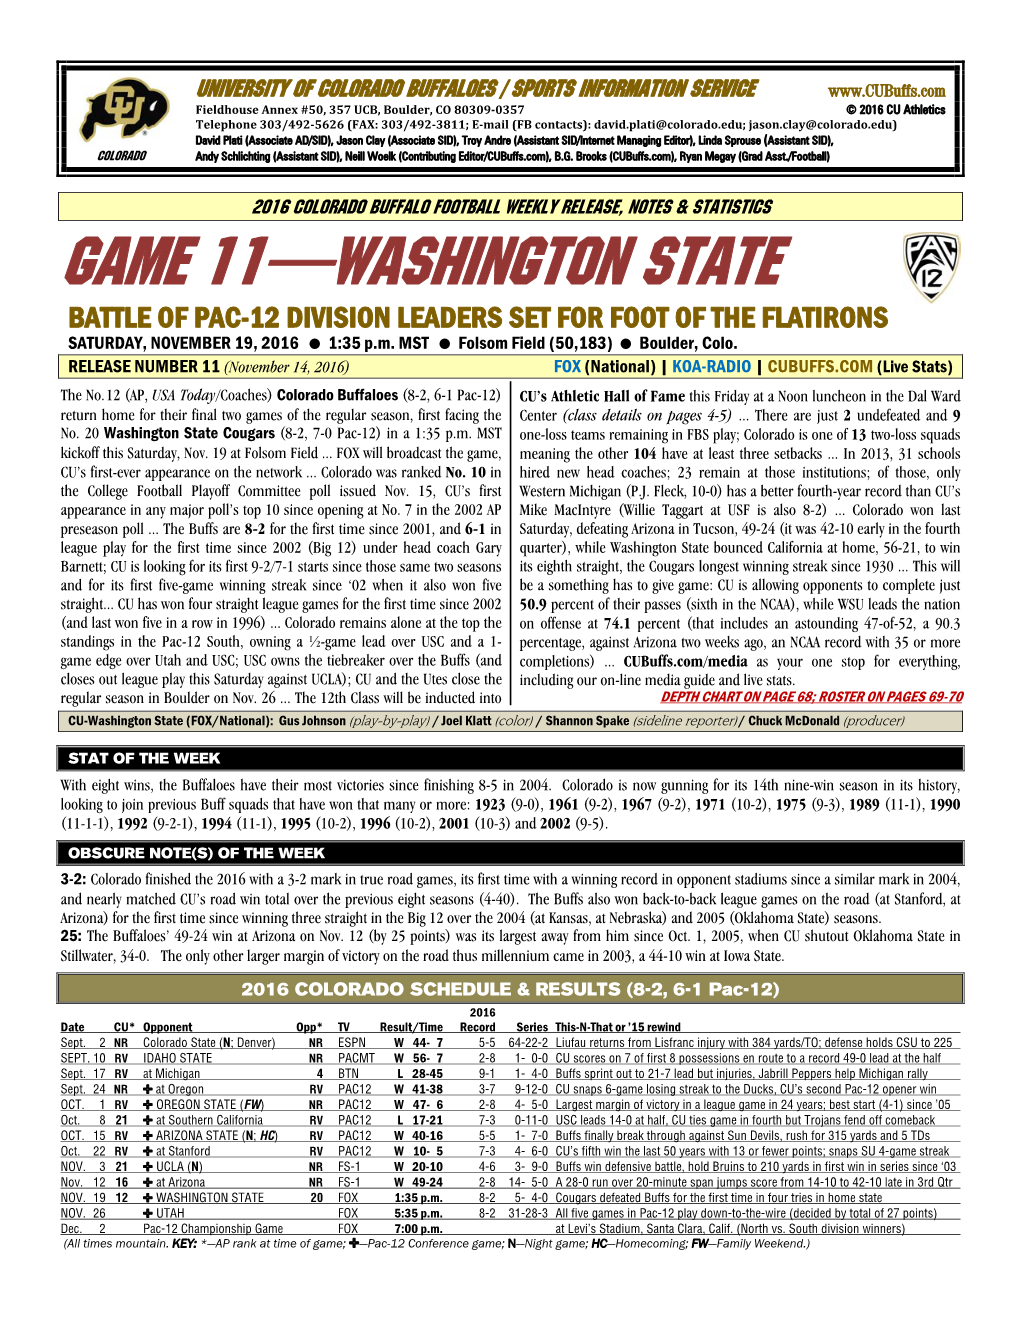 GAME 11—WASHINGTON STATE BATTLE of PAC-12 DIVISION LEADERS SET for FOOT of the FLATIRONS SATURDAY, NOVEMBER 19, 2016 1:35 P.M